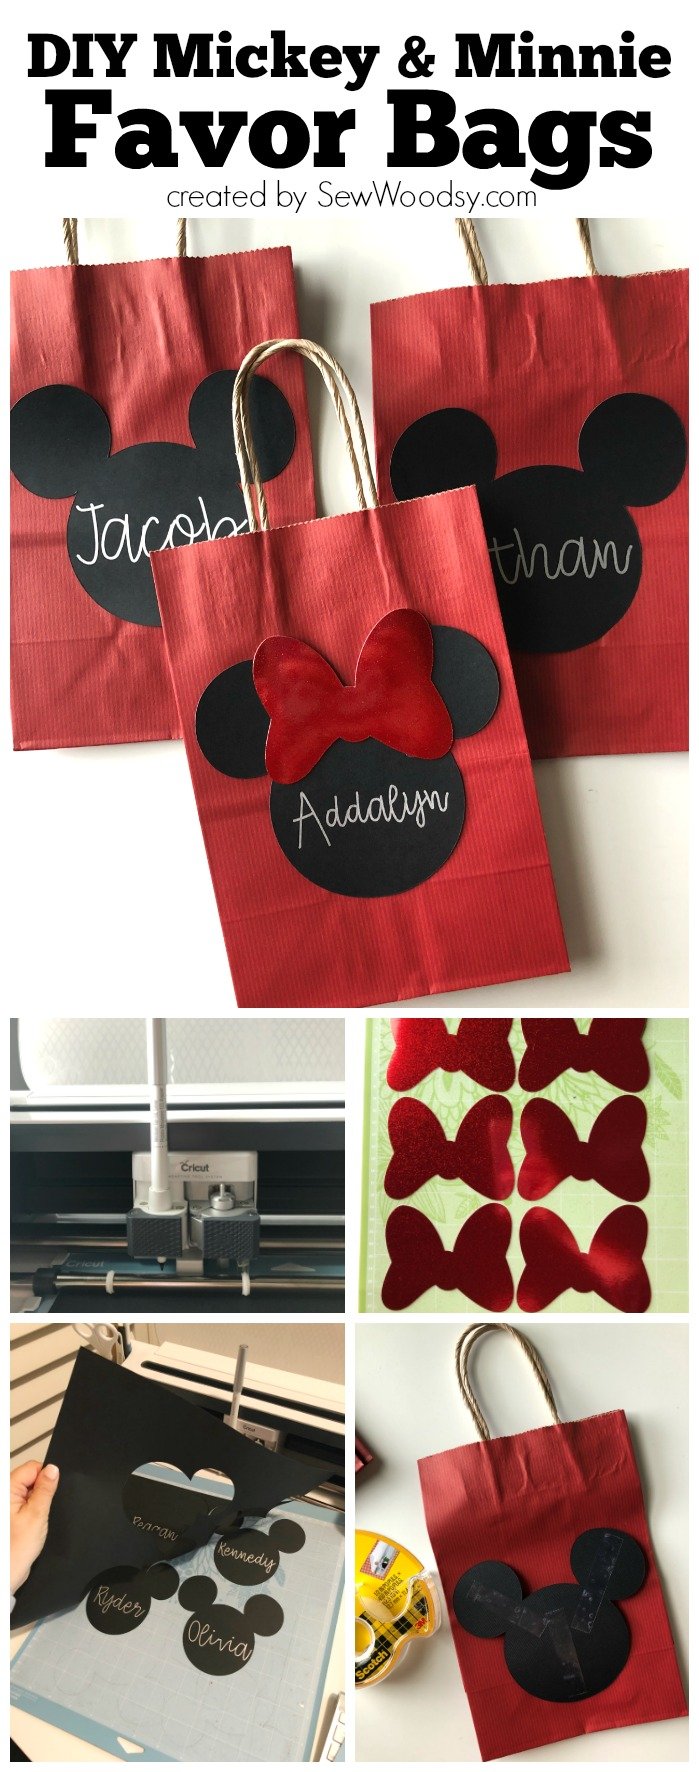 DIY Mickey & Minnie Mouse Favor Bags